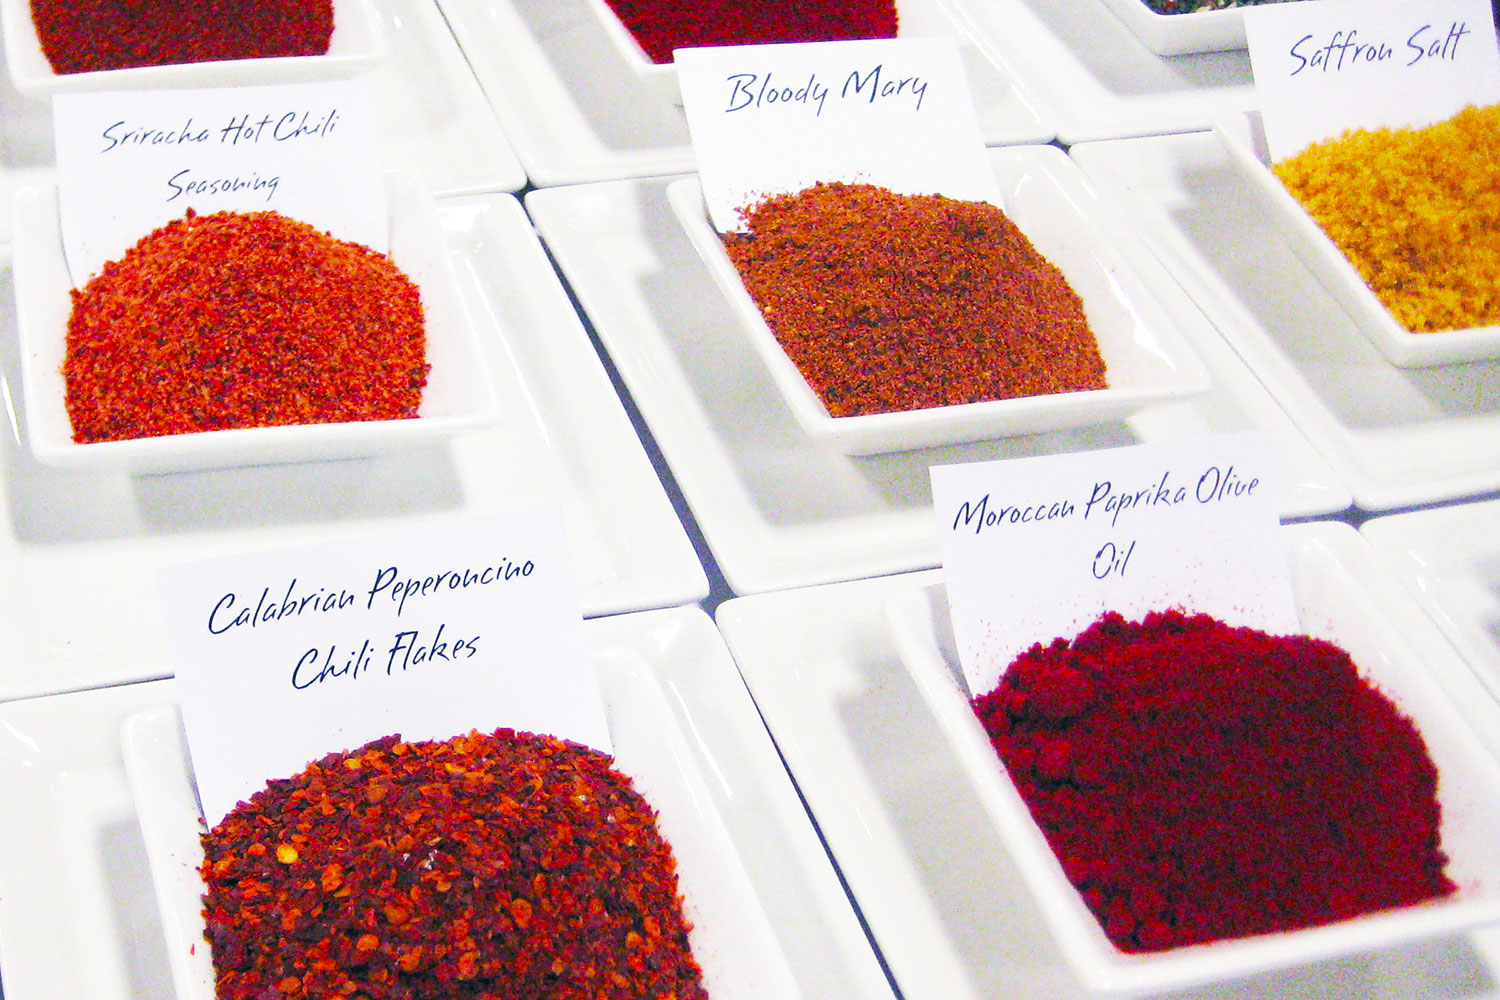 Winter Fancy Food Show - spices